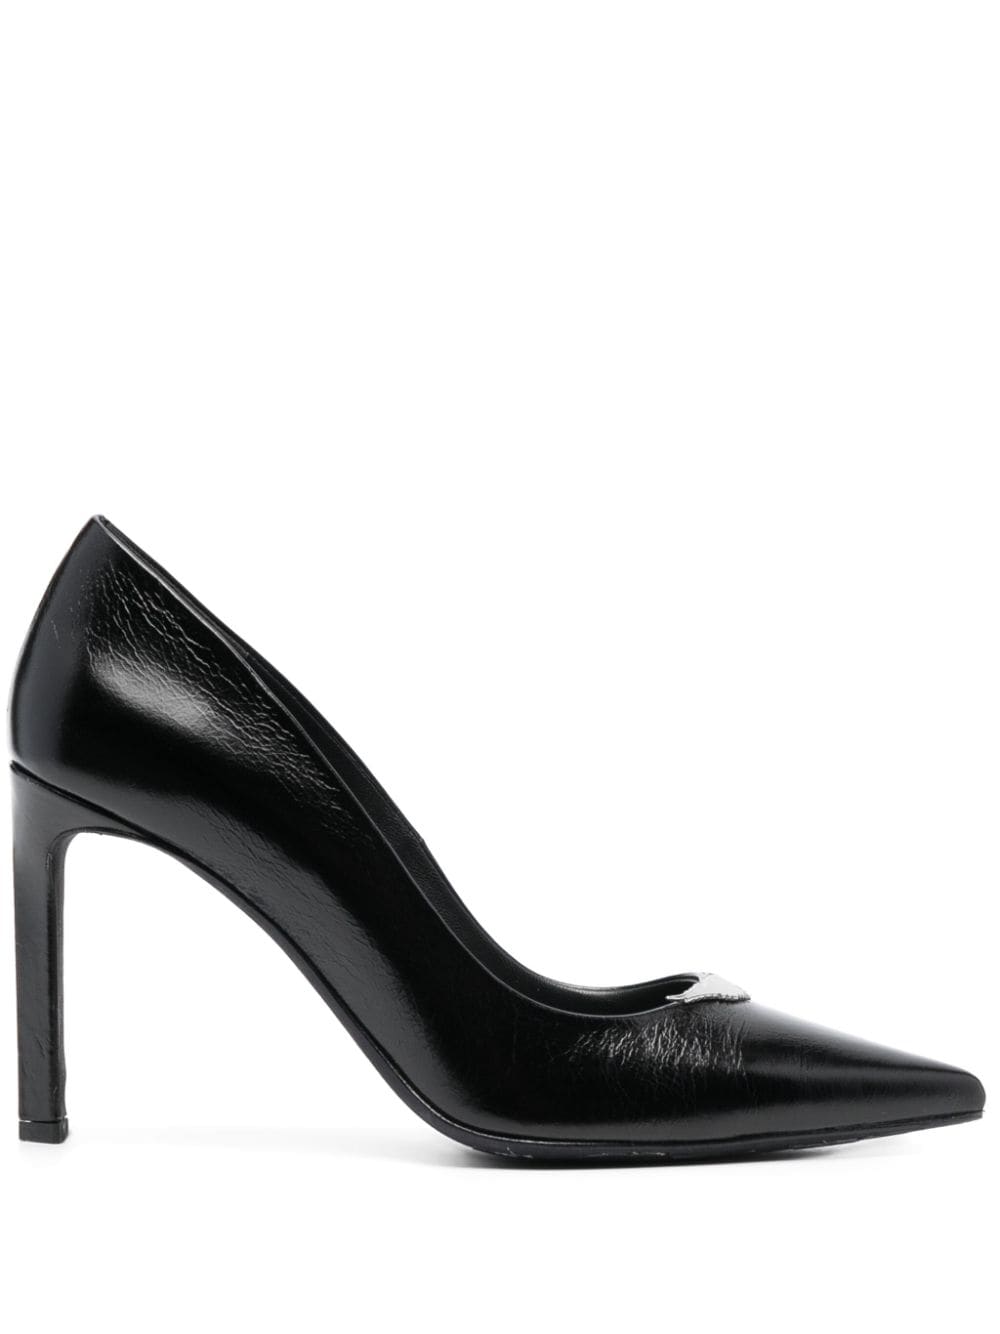 Zadig & Voltaire Perfect Vintage 100mm Leather Pumps In Black